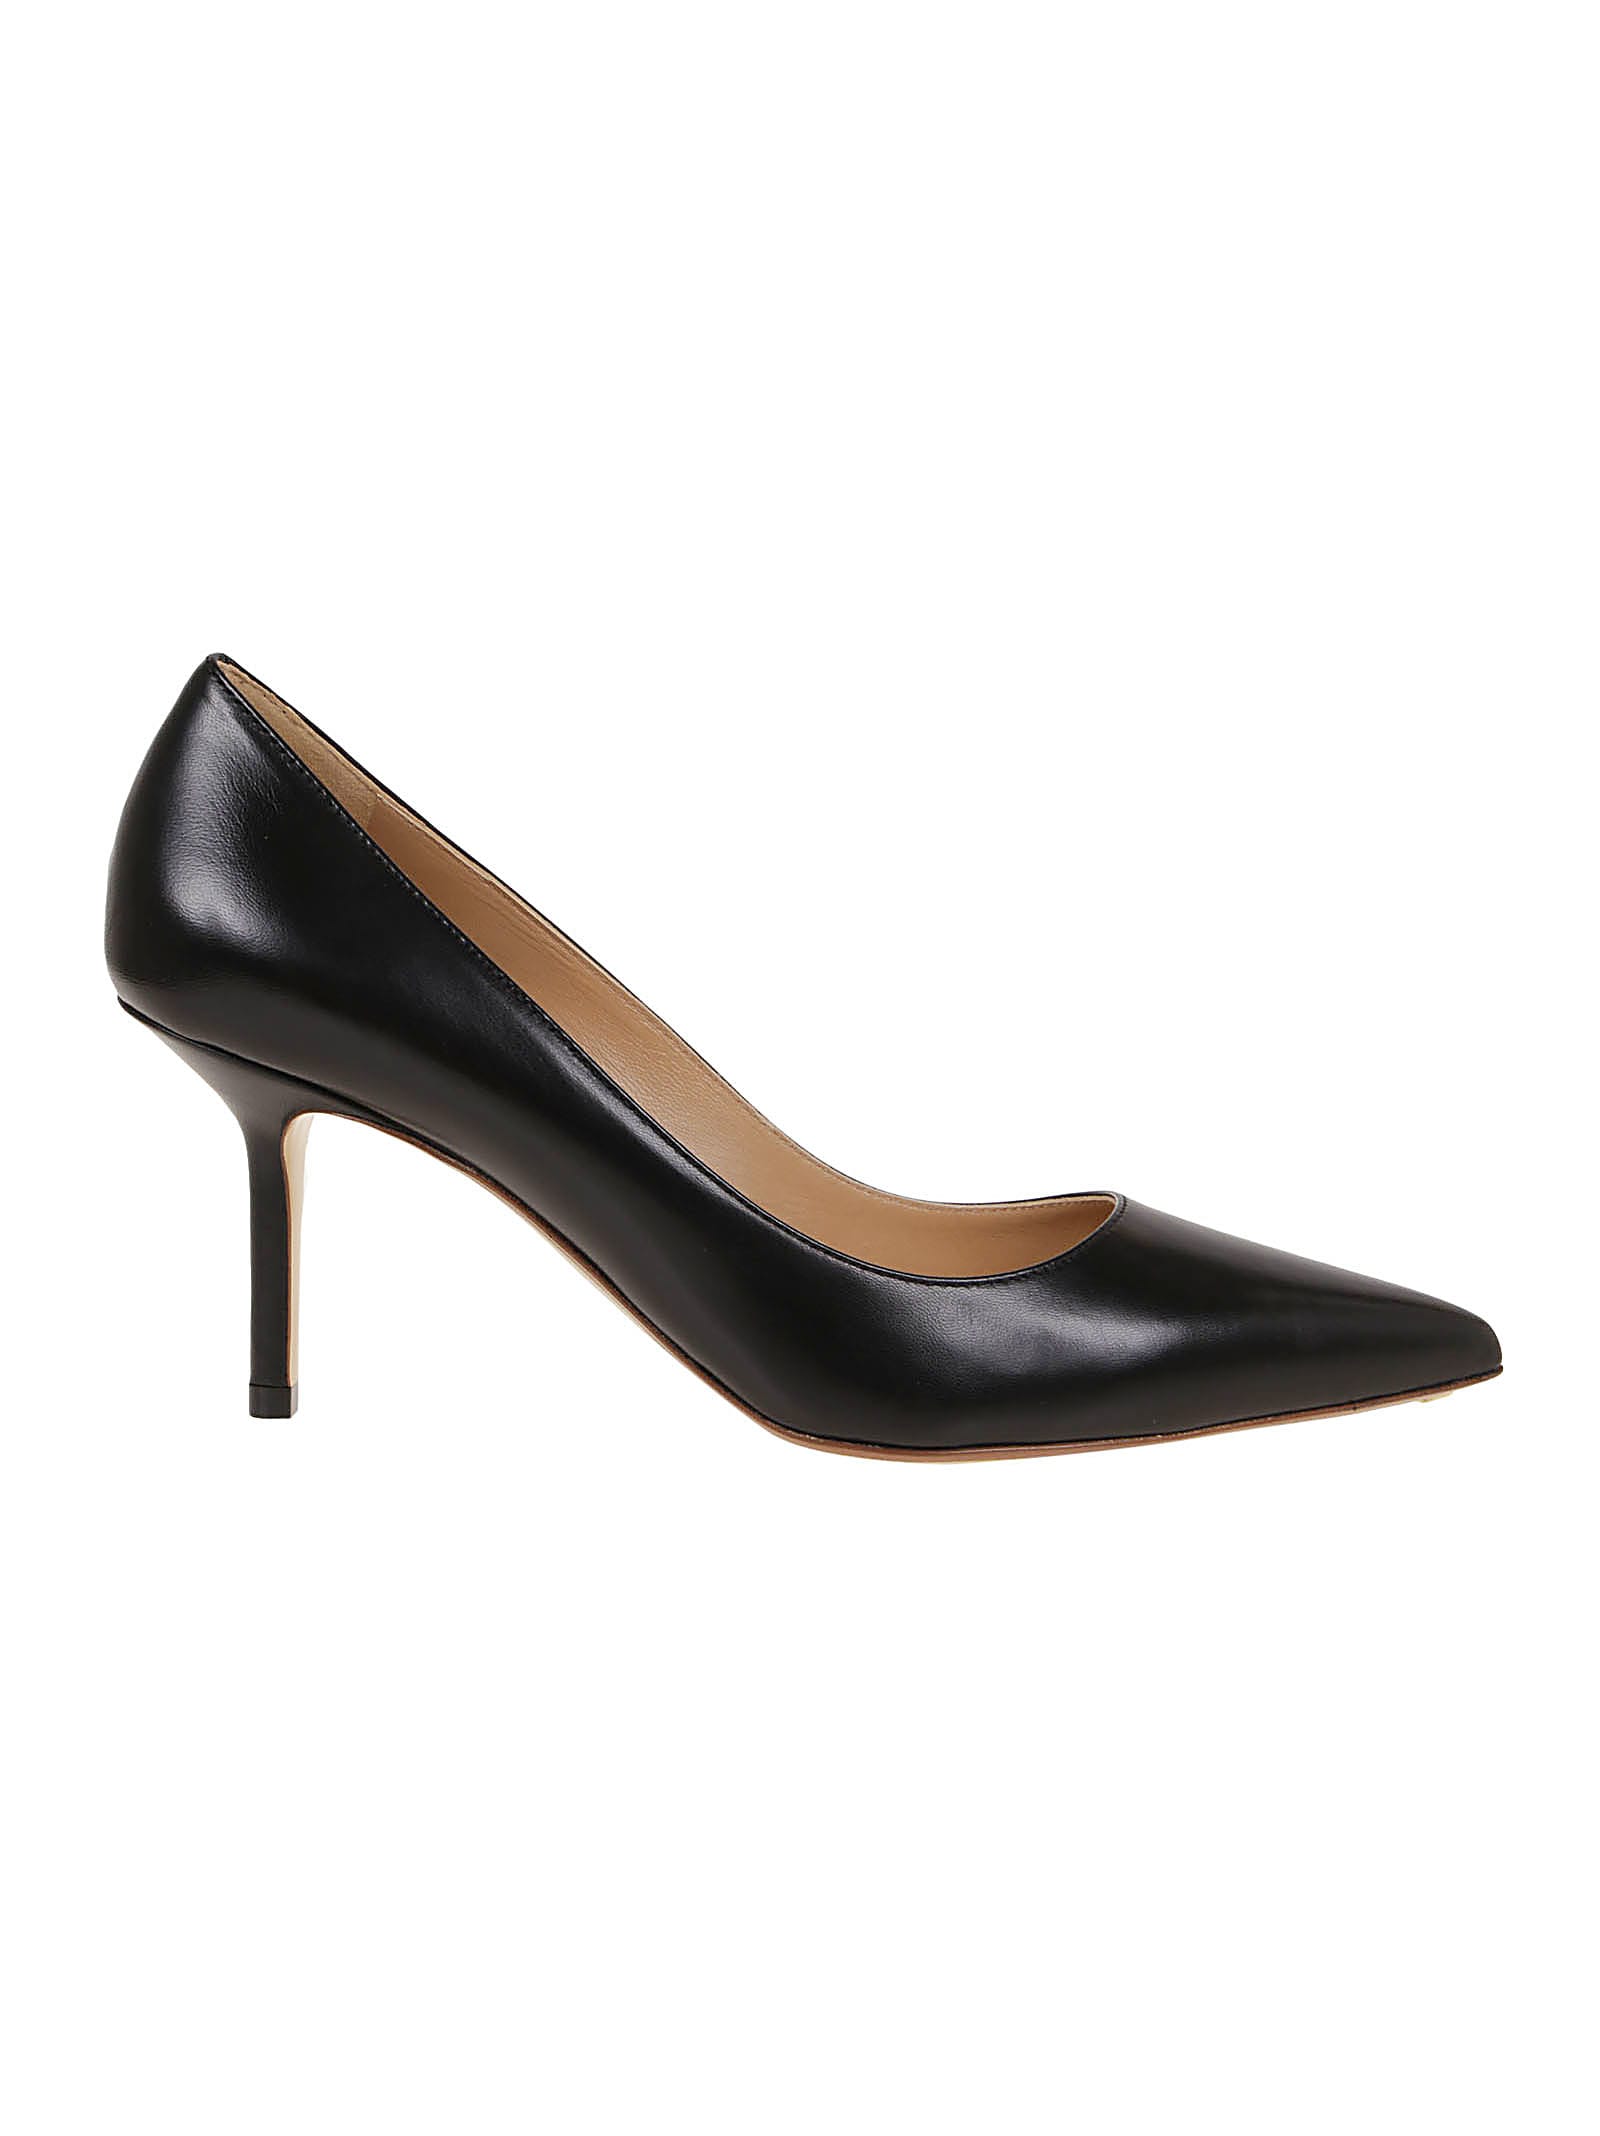 Buy Francesco Russo Pump Mid Heel online, shop Francesco Russo shoes with free shipping